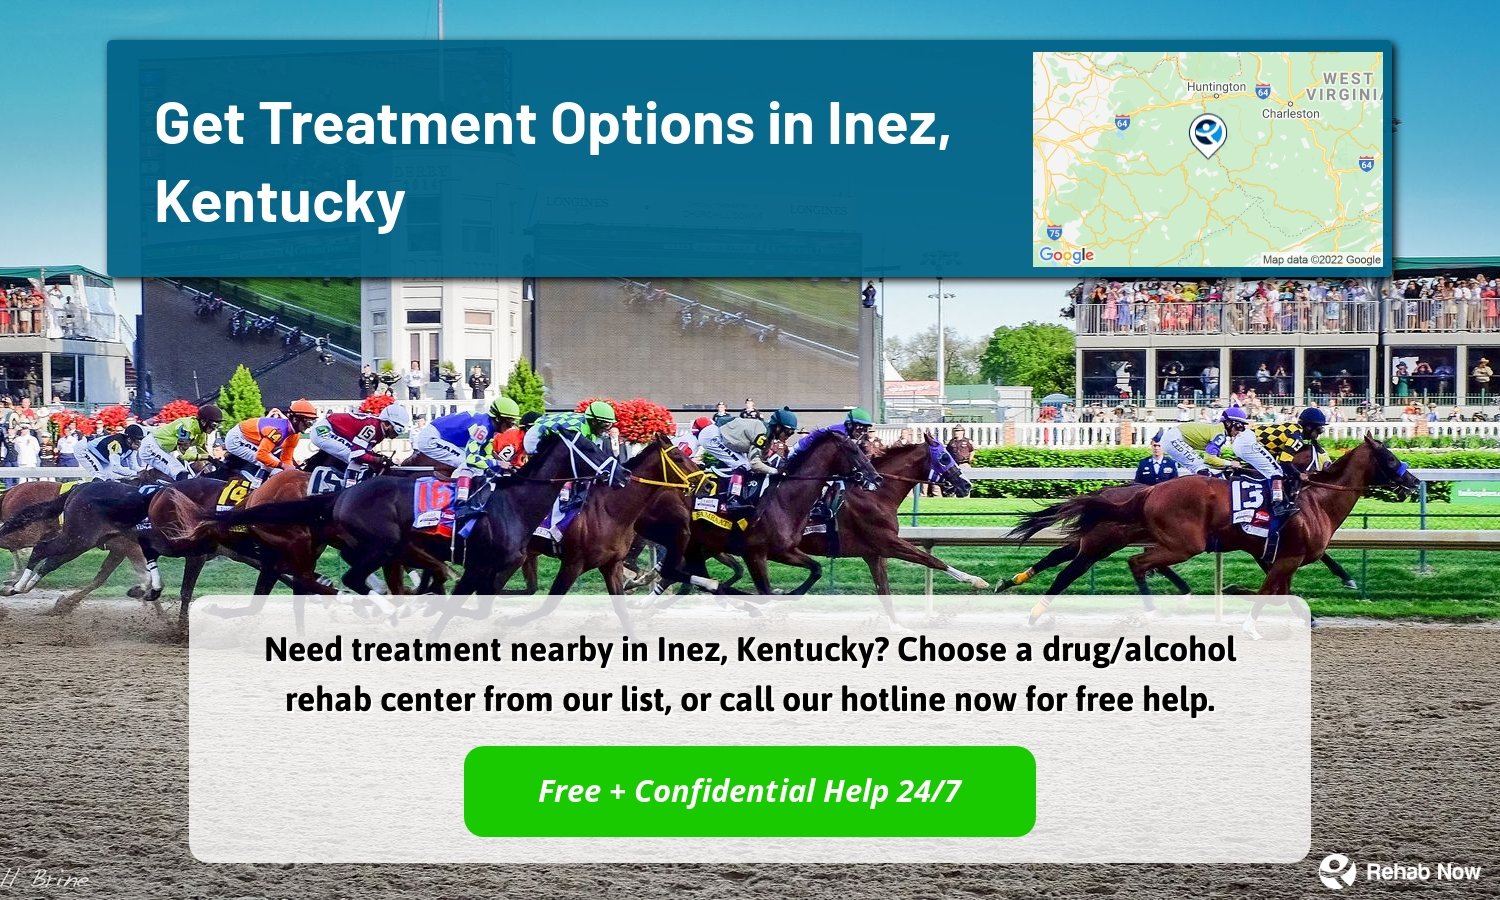 Need treatment nearby in Inez, Kentucky? Choose a drug/alcohol rehab center from our list, or call our hotline now for free help.